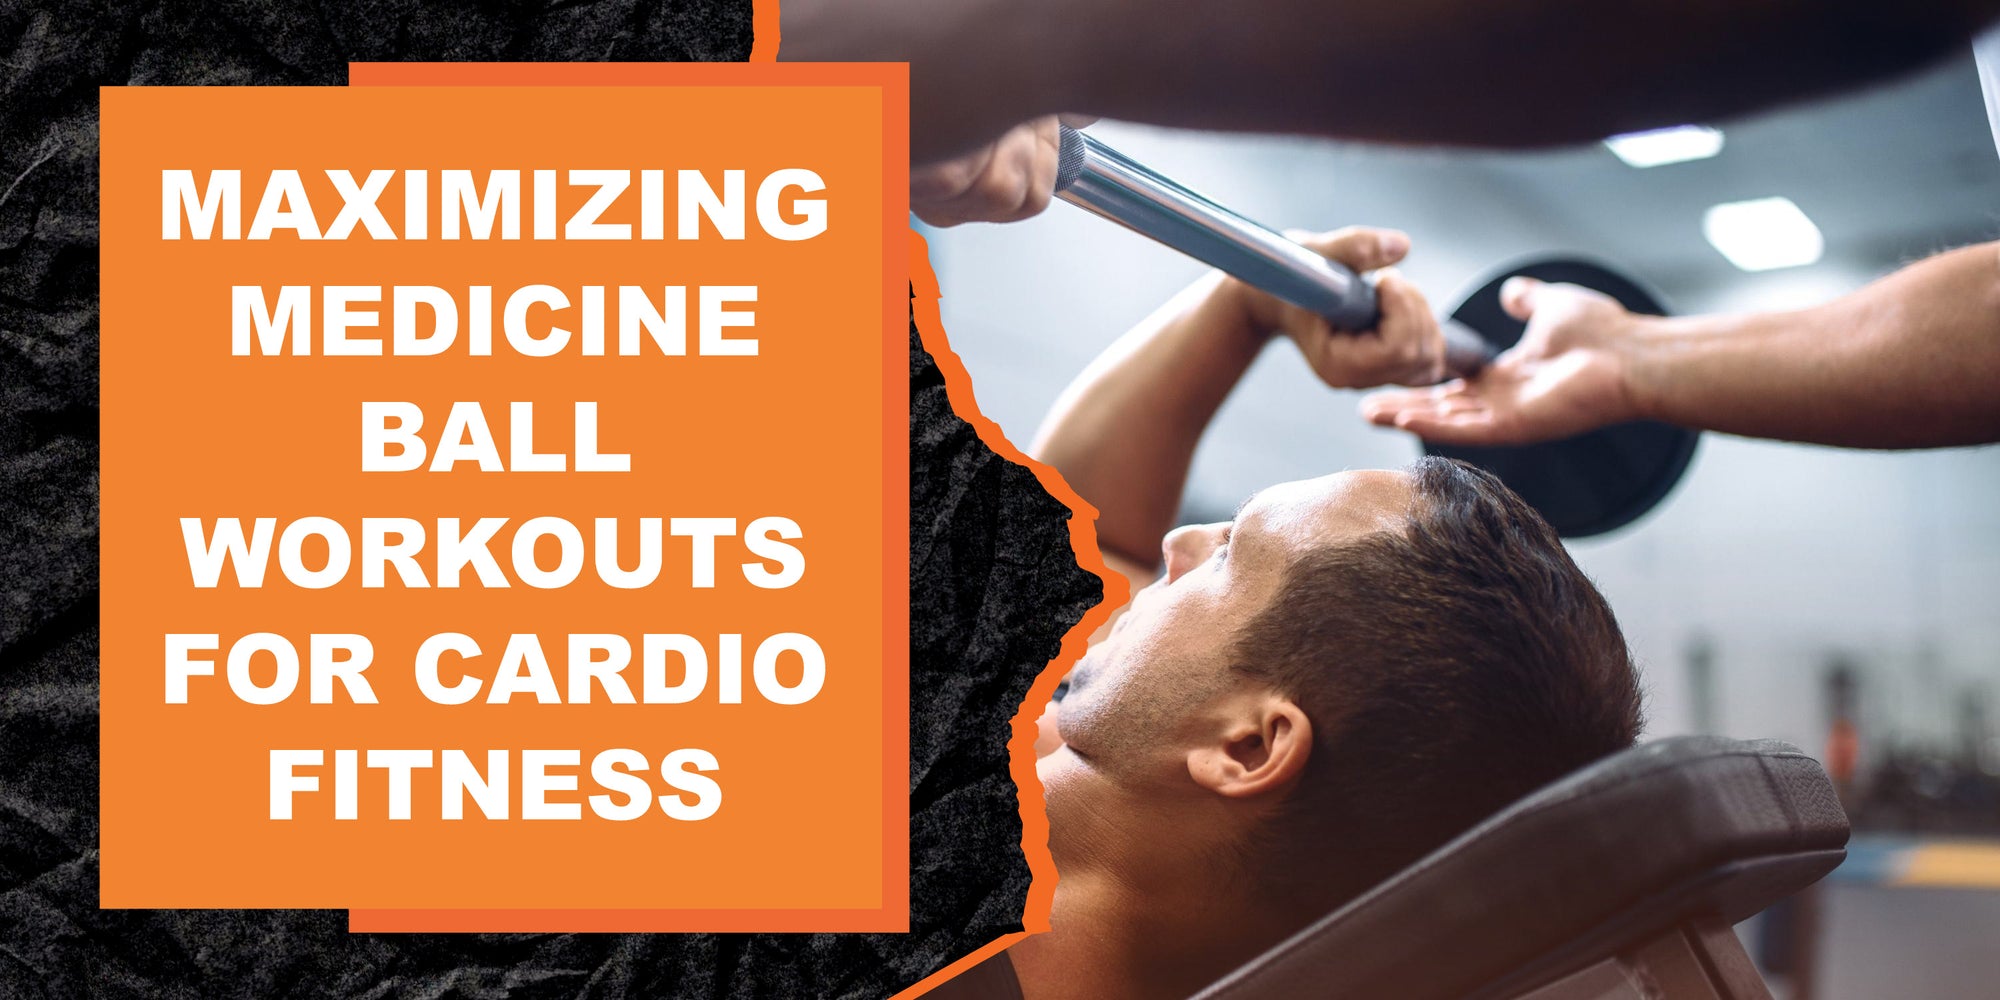 Maximizing Medicine Ball Workouts for Cardio Fitness